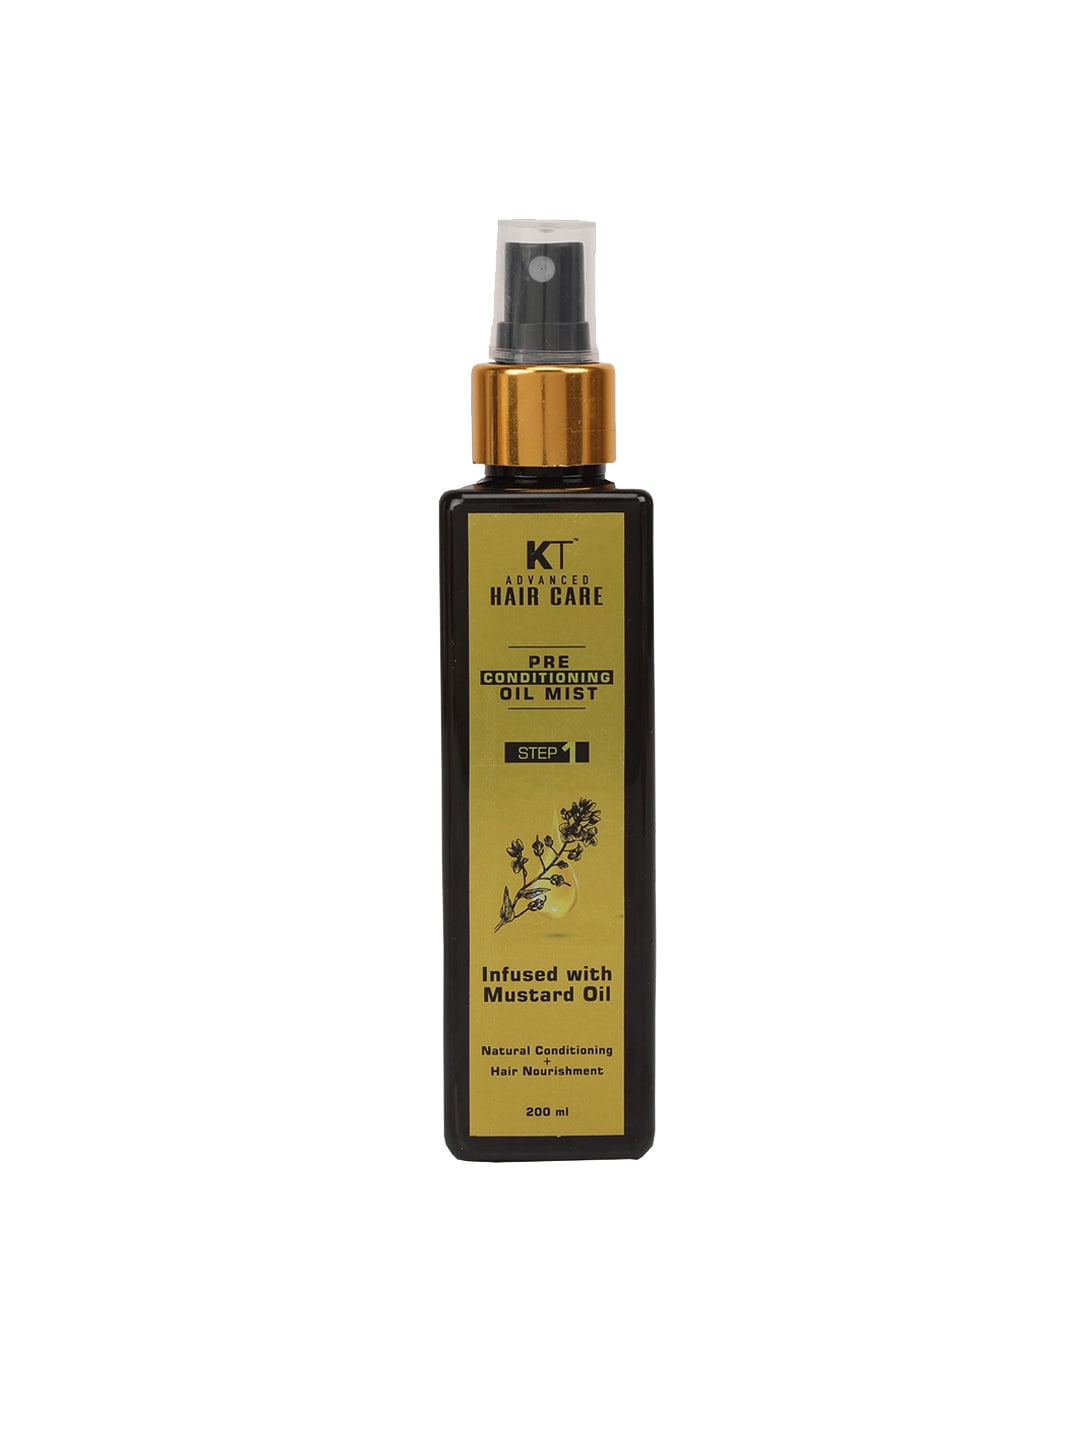 KEHAIRTHERAPY Advance Hair Care Pre Conditioning Oil Mist Spray with Mustard Oil - 200 ml Price in India